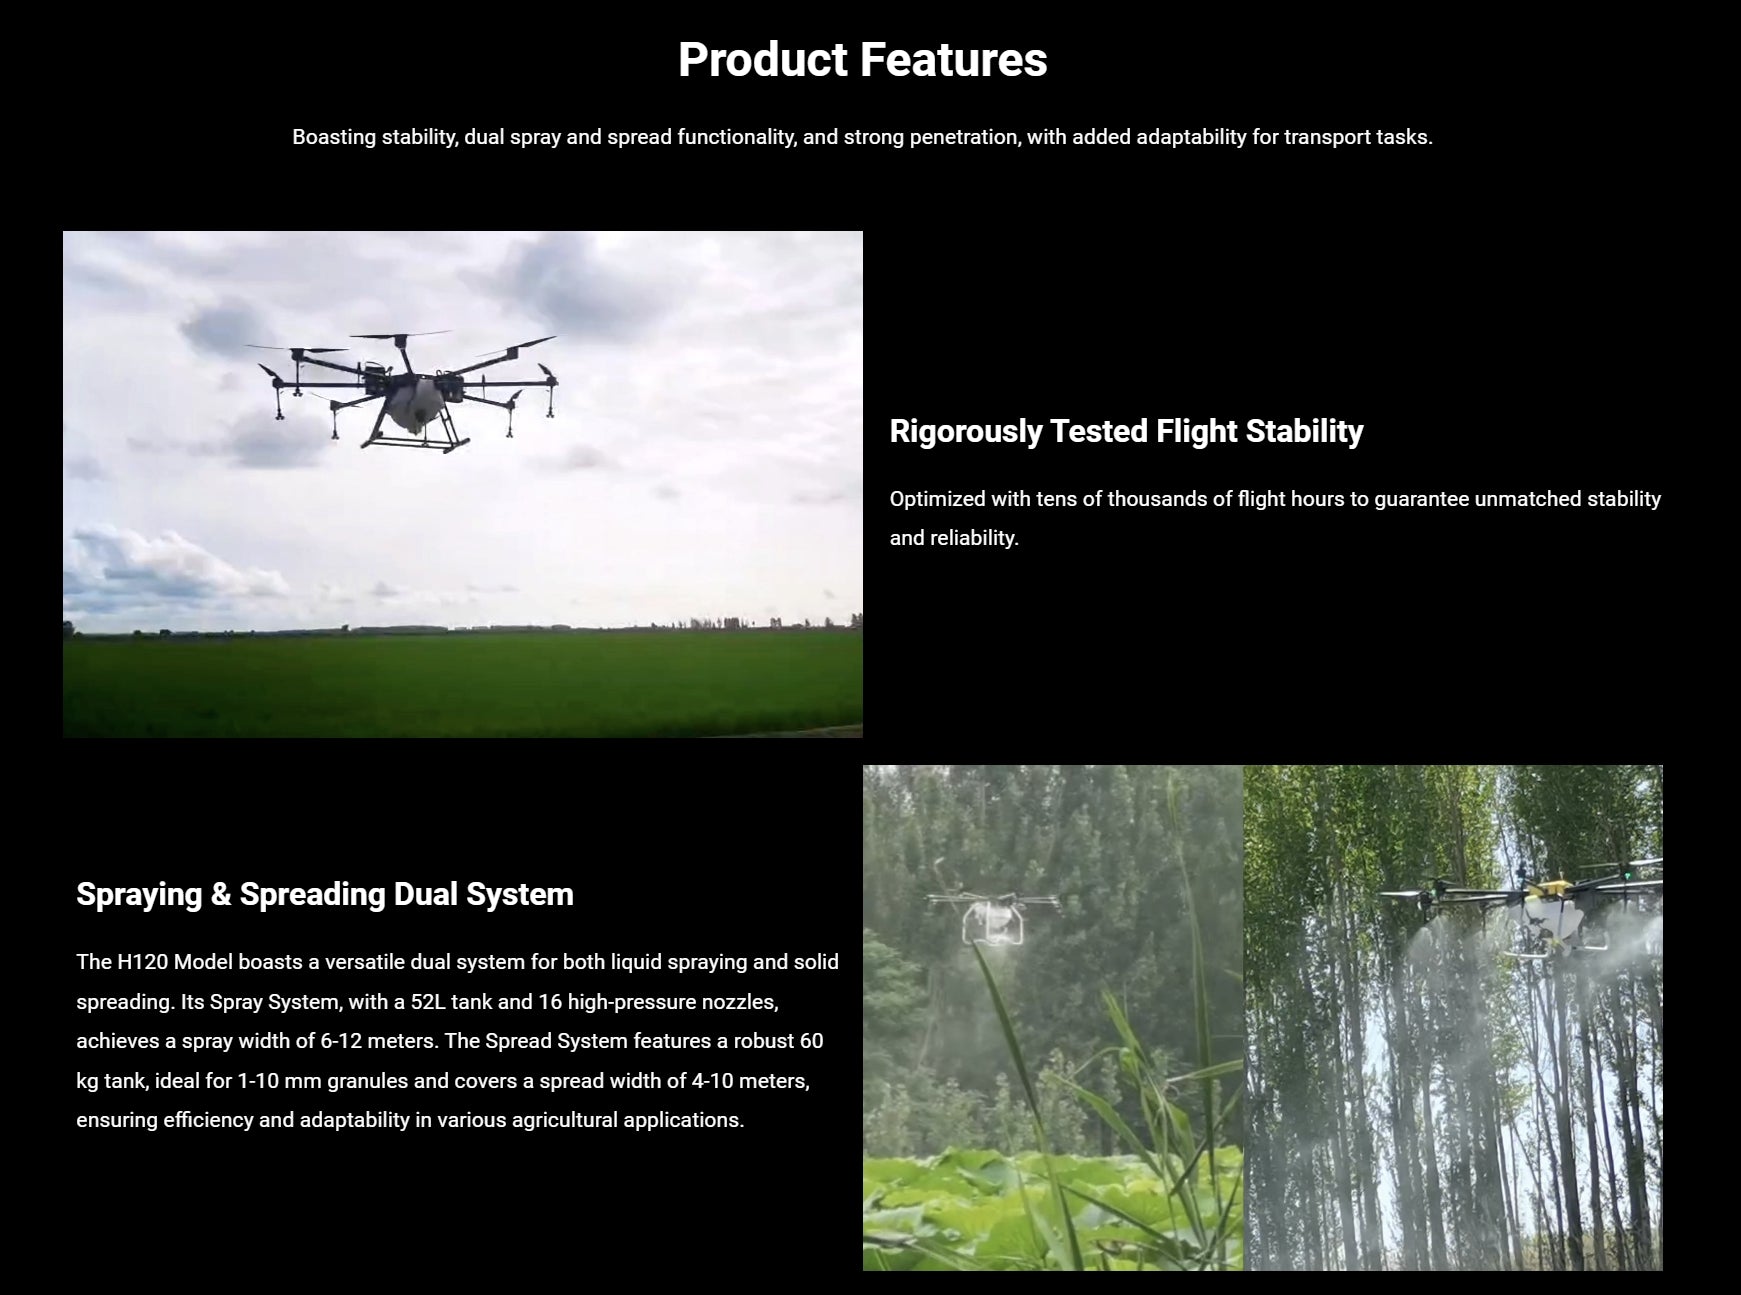 H120 Agriculture Drone, the H120 model boasts a versatile dual system for both liquid spraying and solid spreading